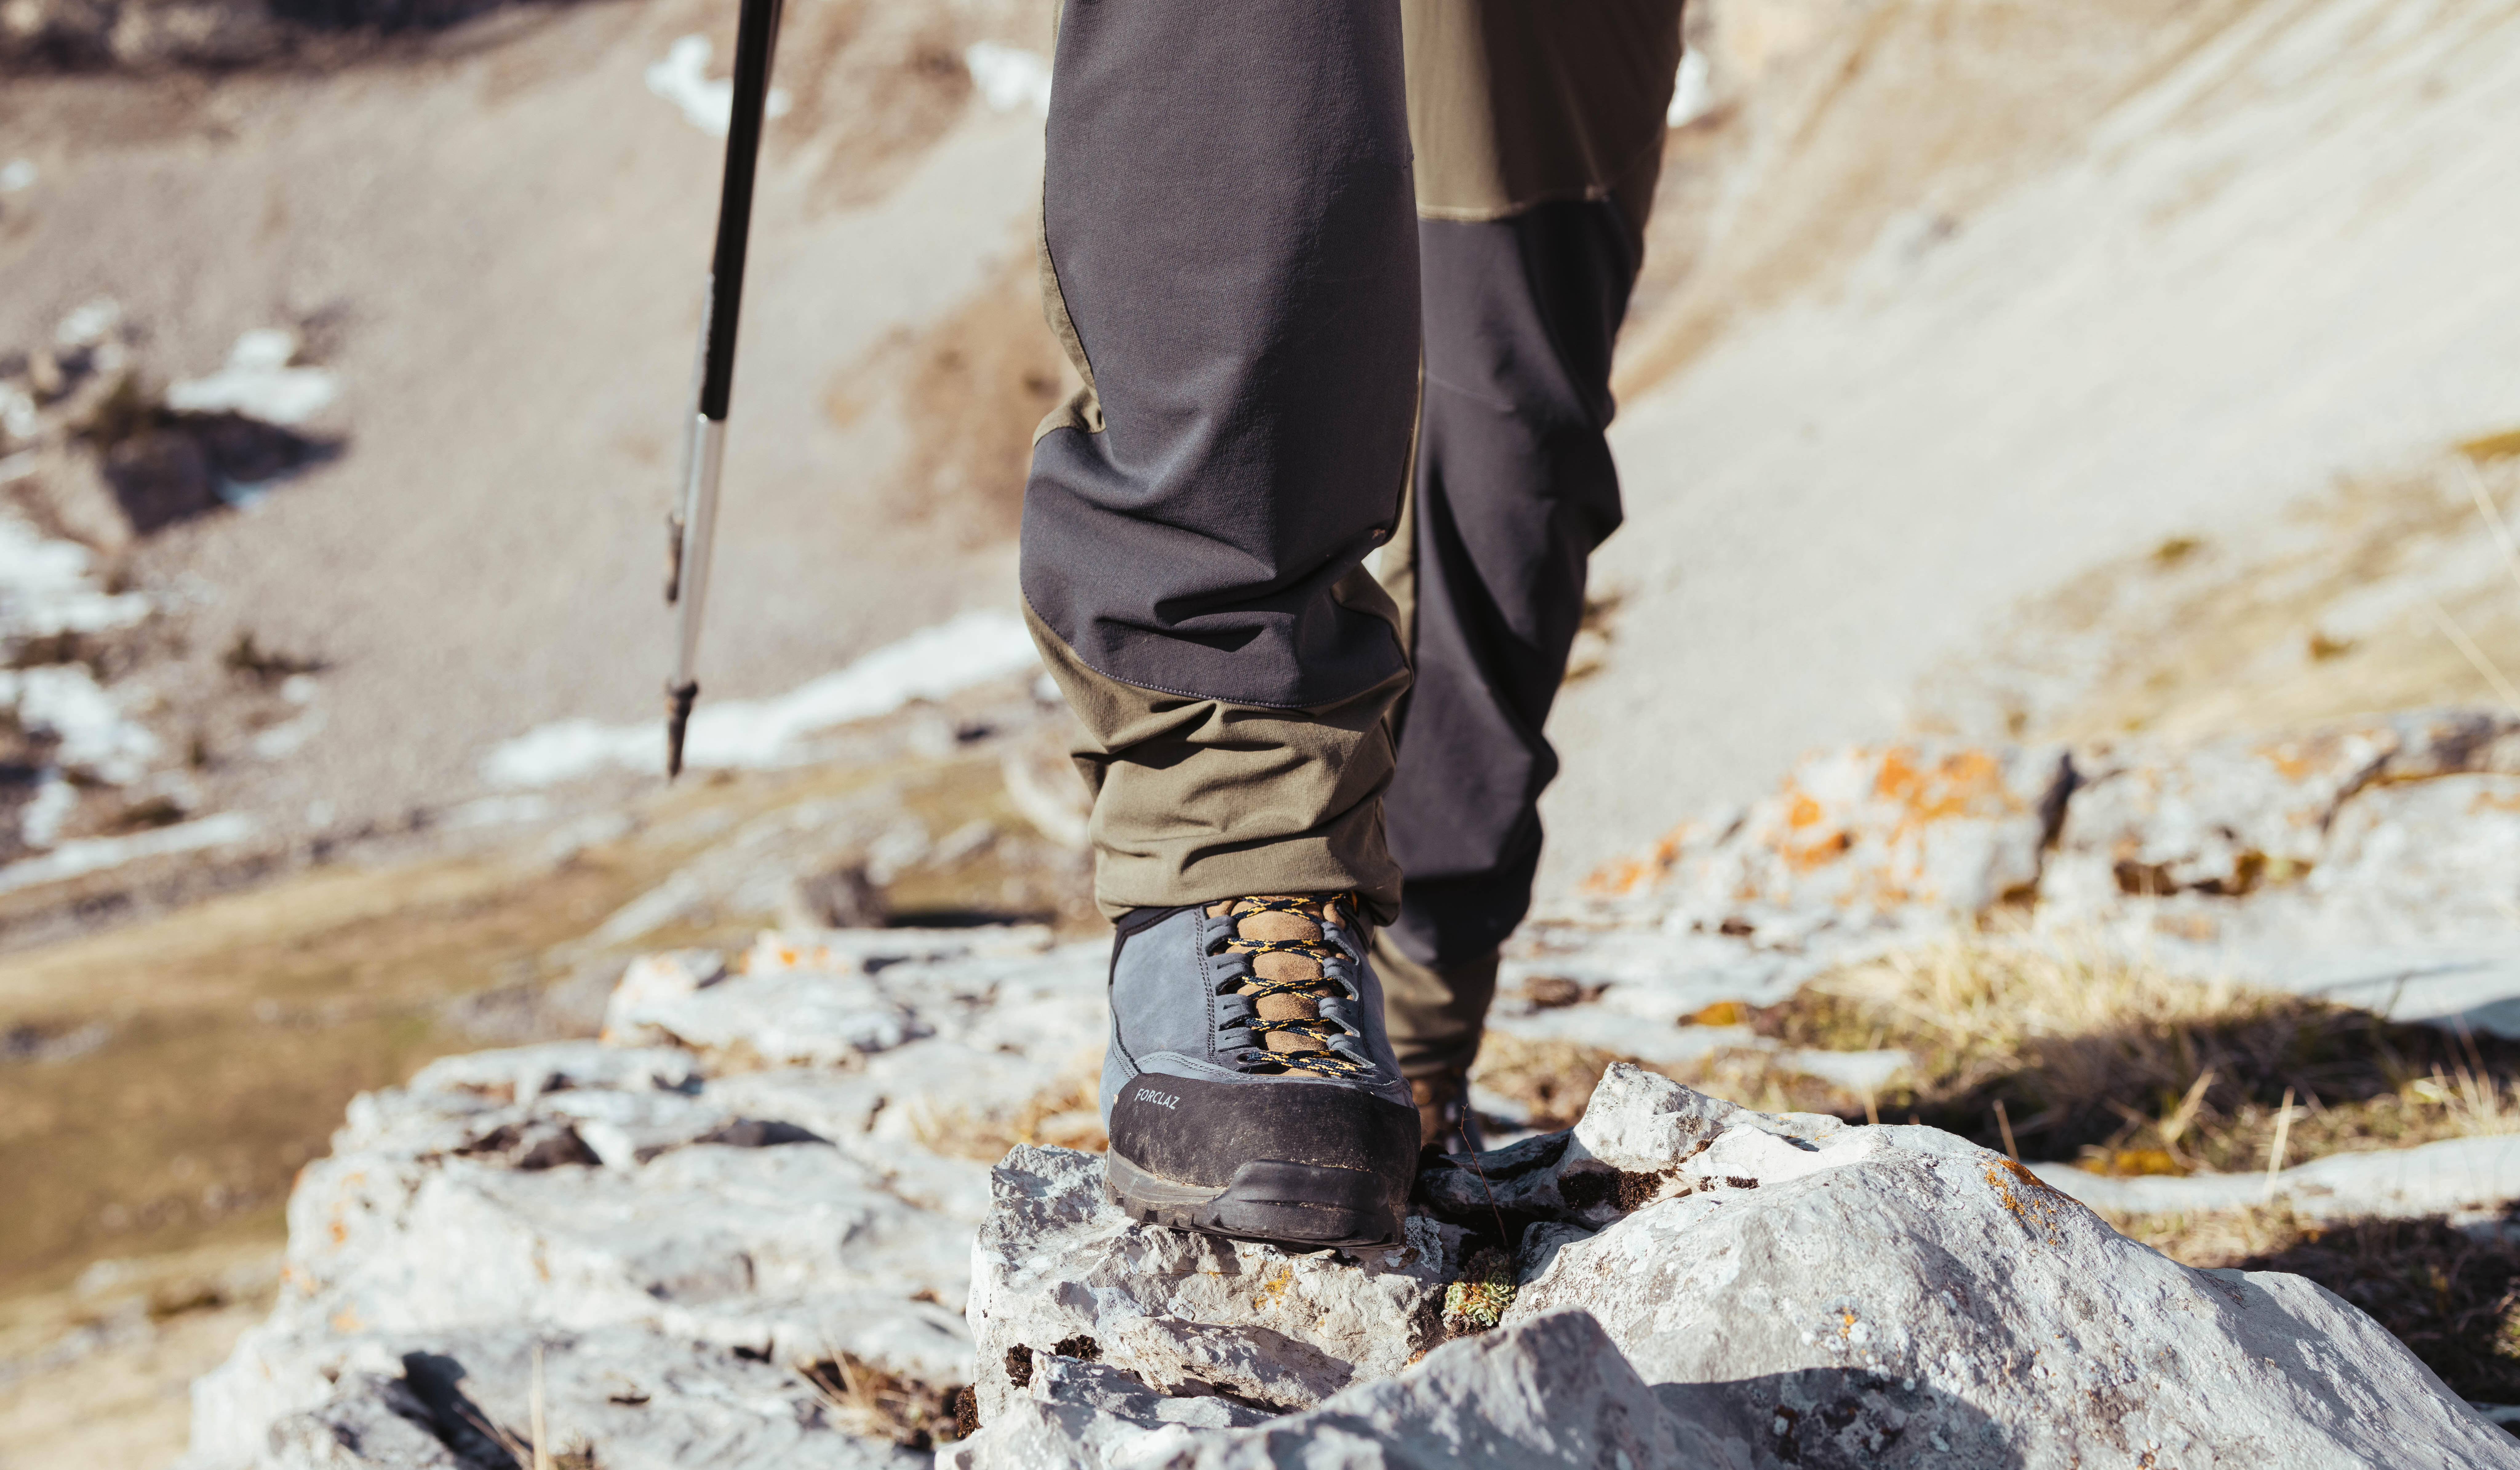 HOW TO CHOOSE BOOTS TO GO TREKKING?